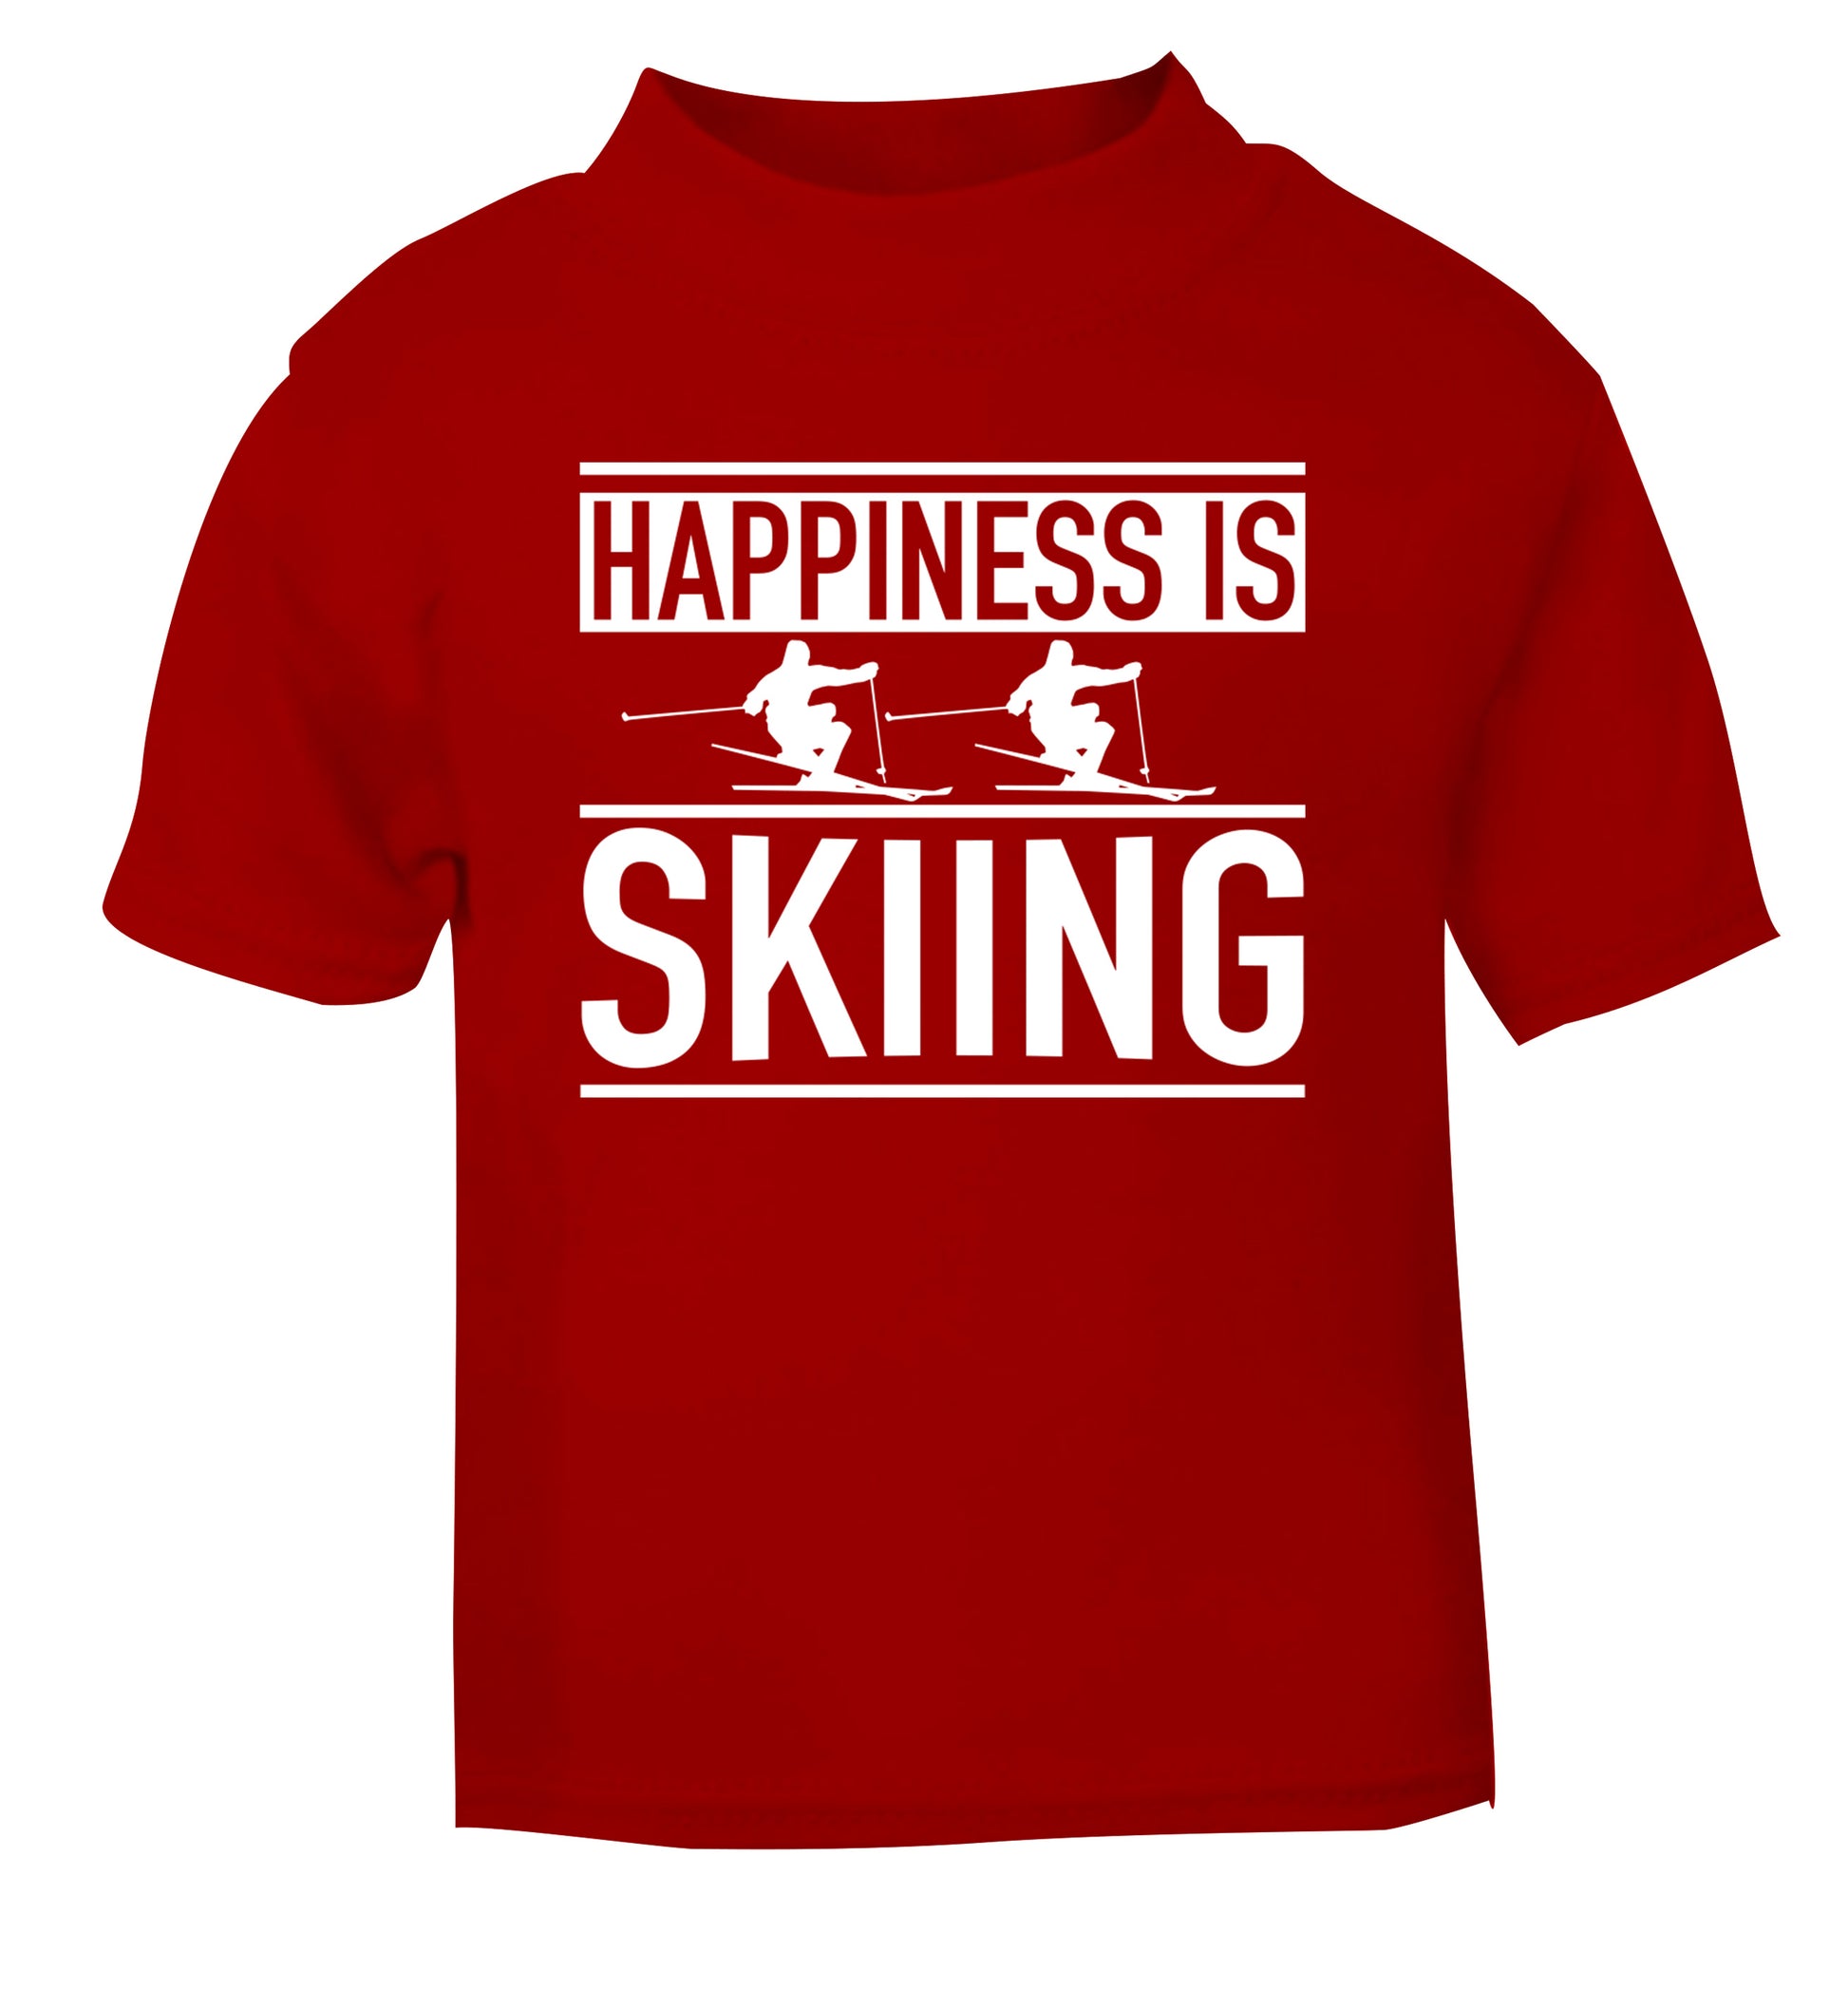 Happiness is skiing red Baby Toddler Tshirt 2 Years